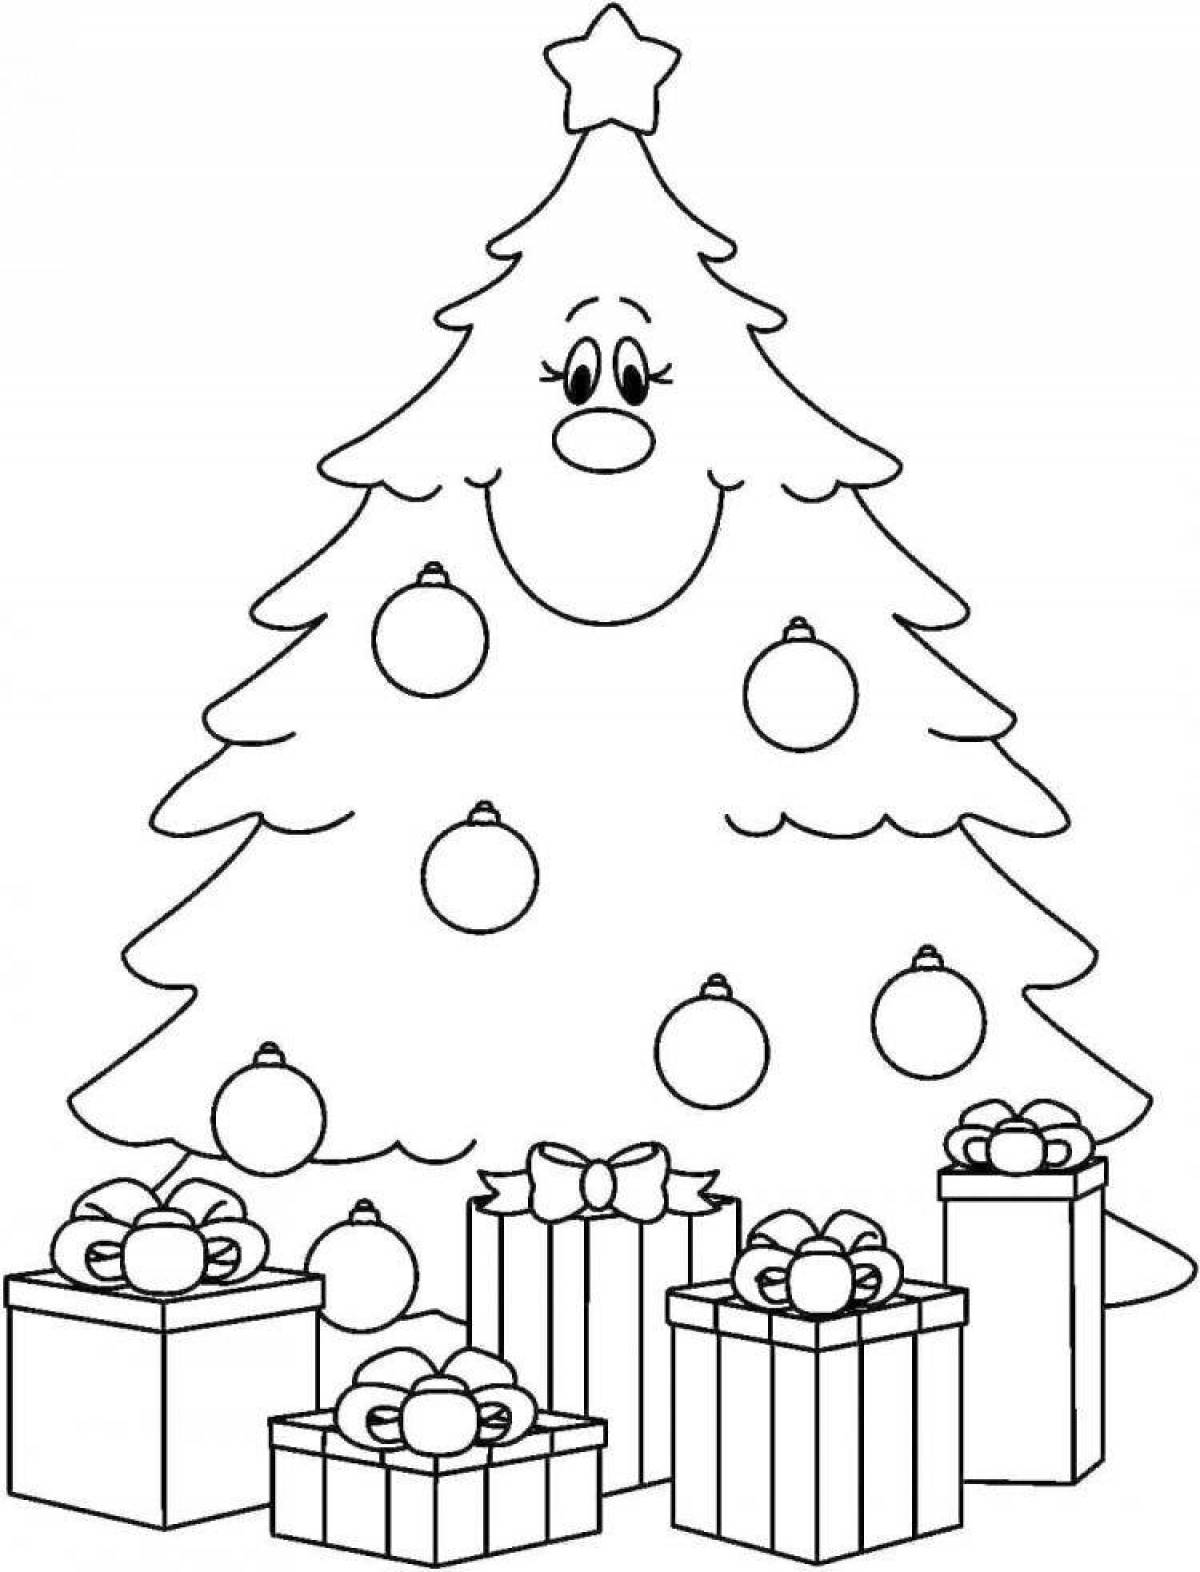 Great coloring tree with gifts